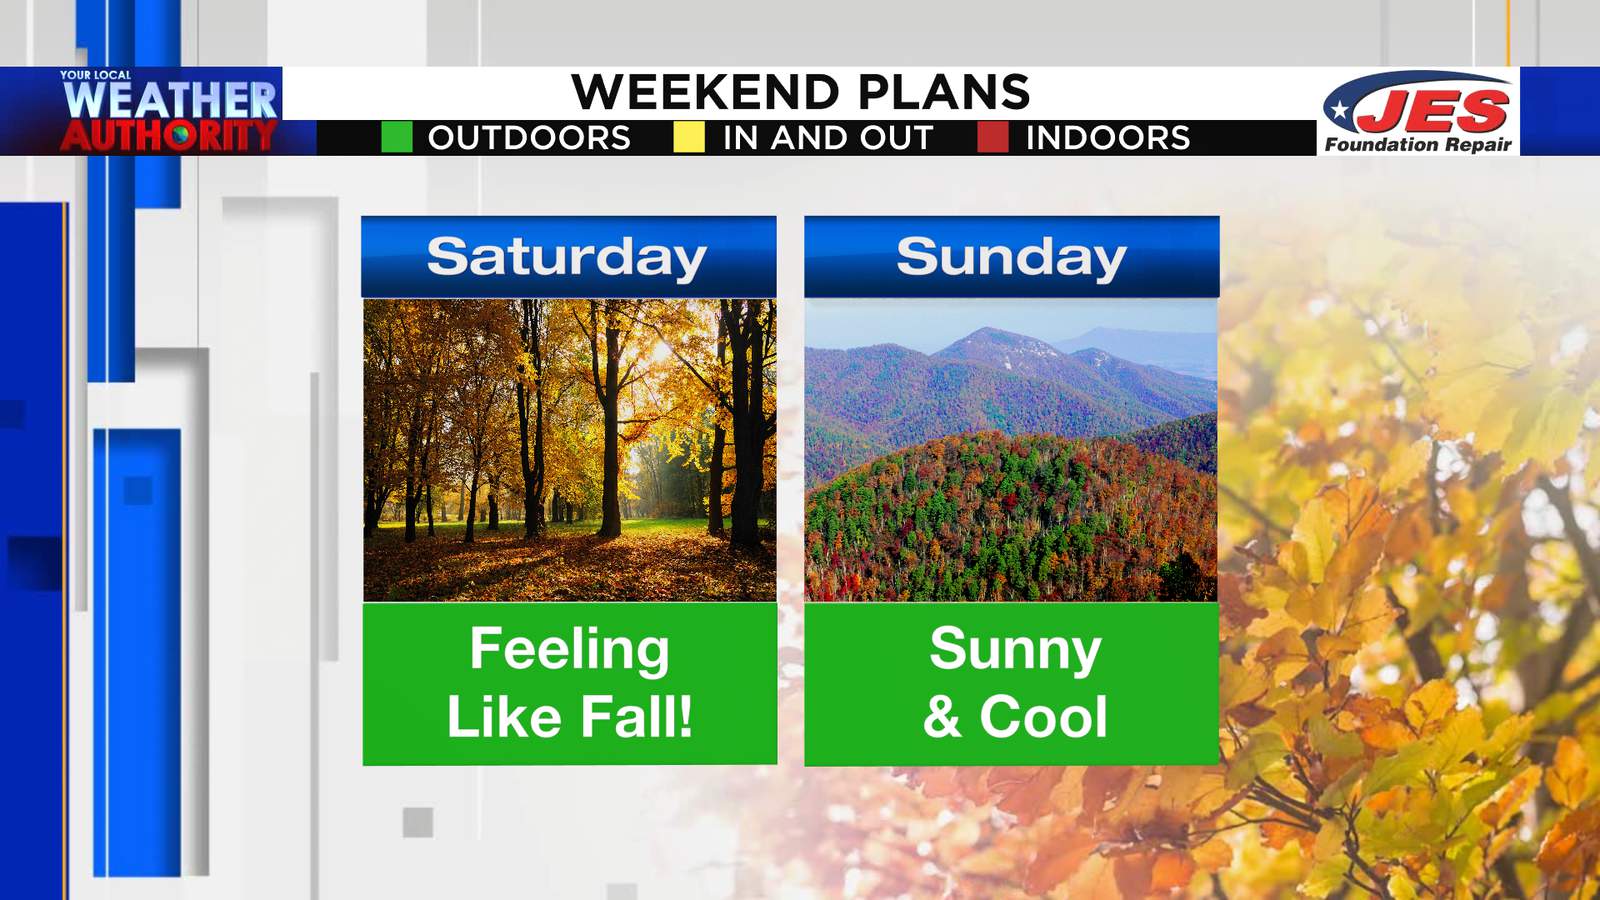 Hit the pumpkin patch! Fabulous fall weather all weekend